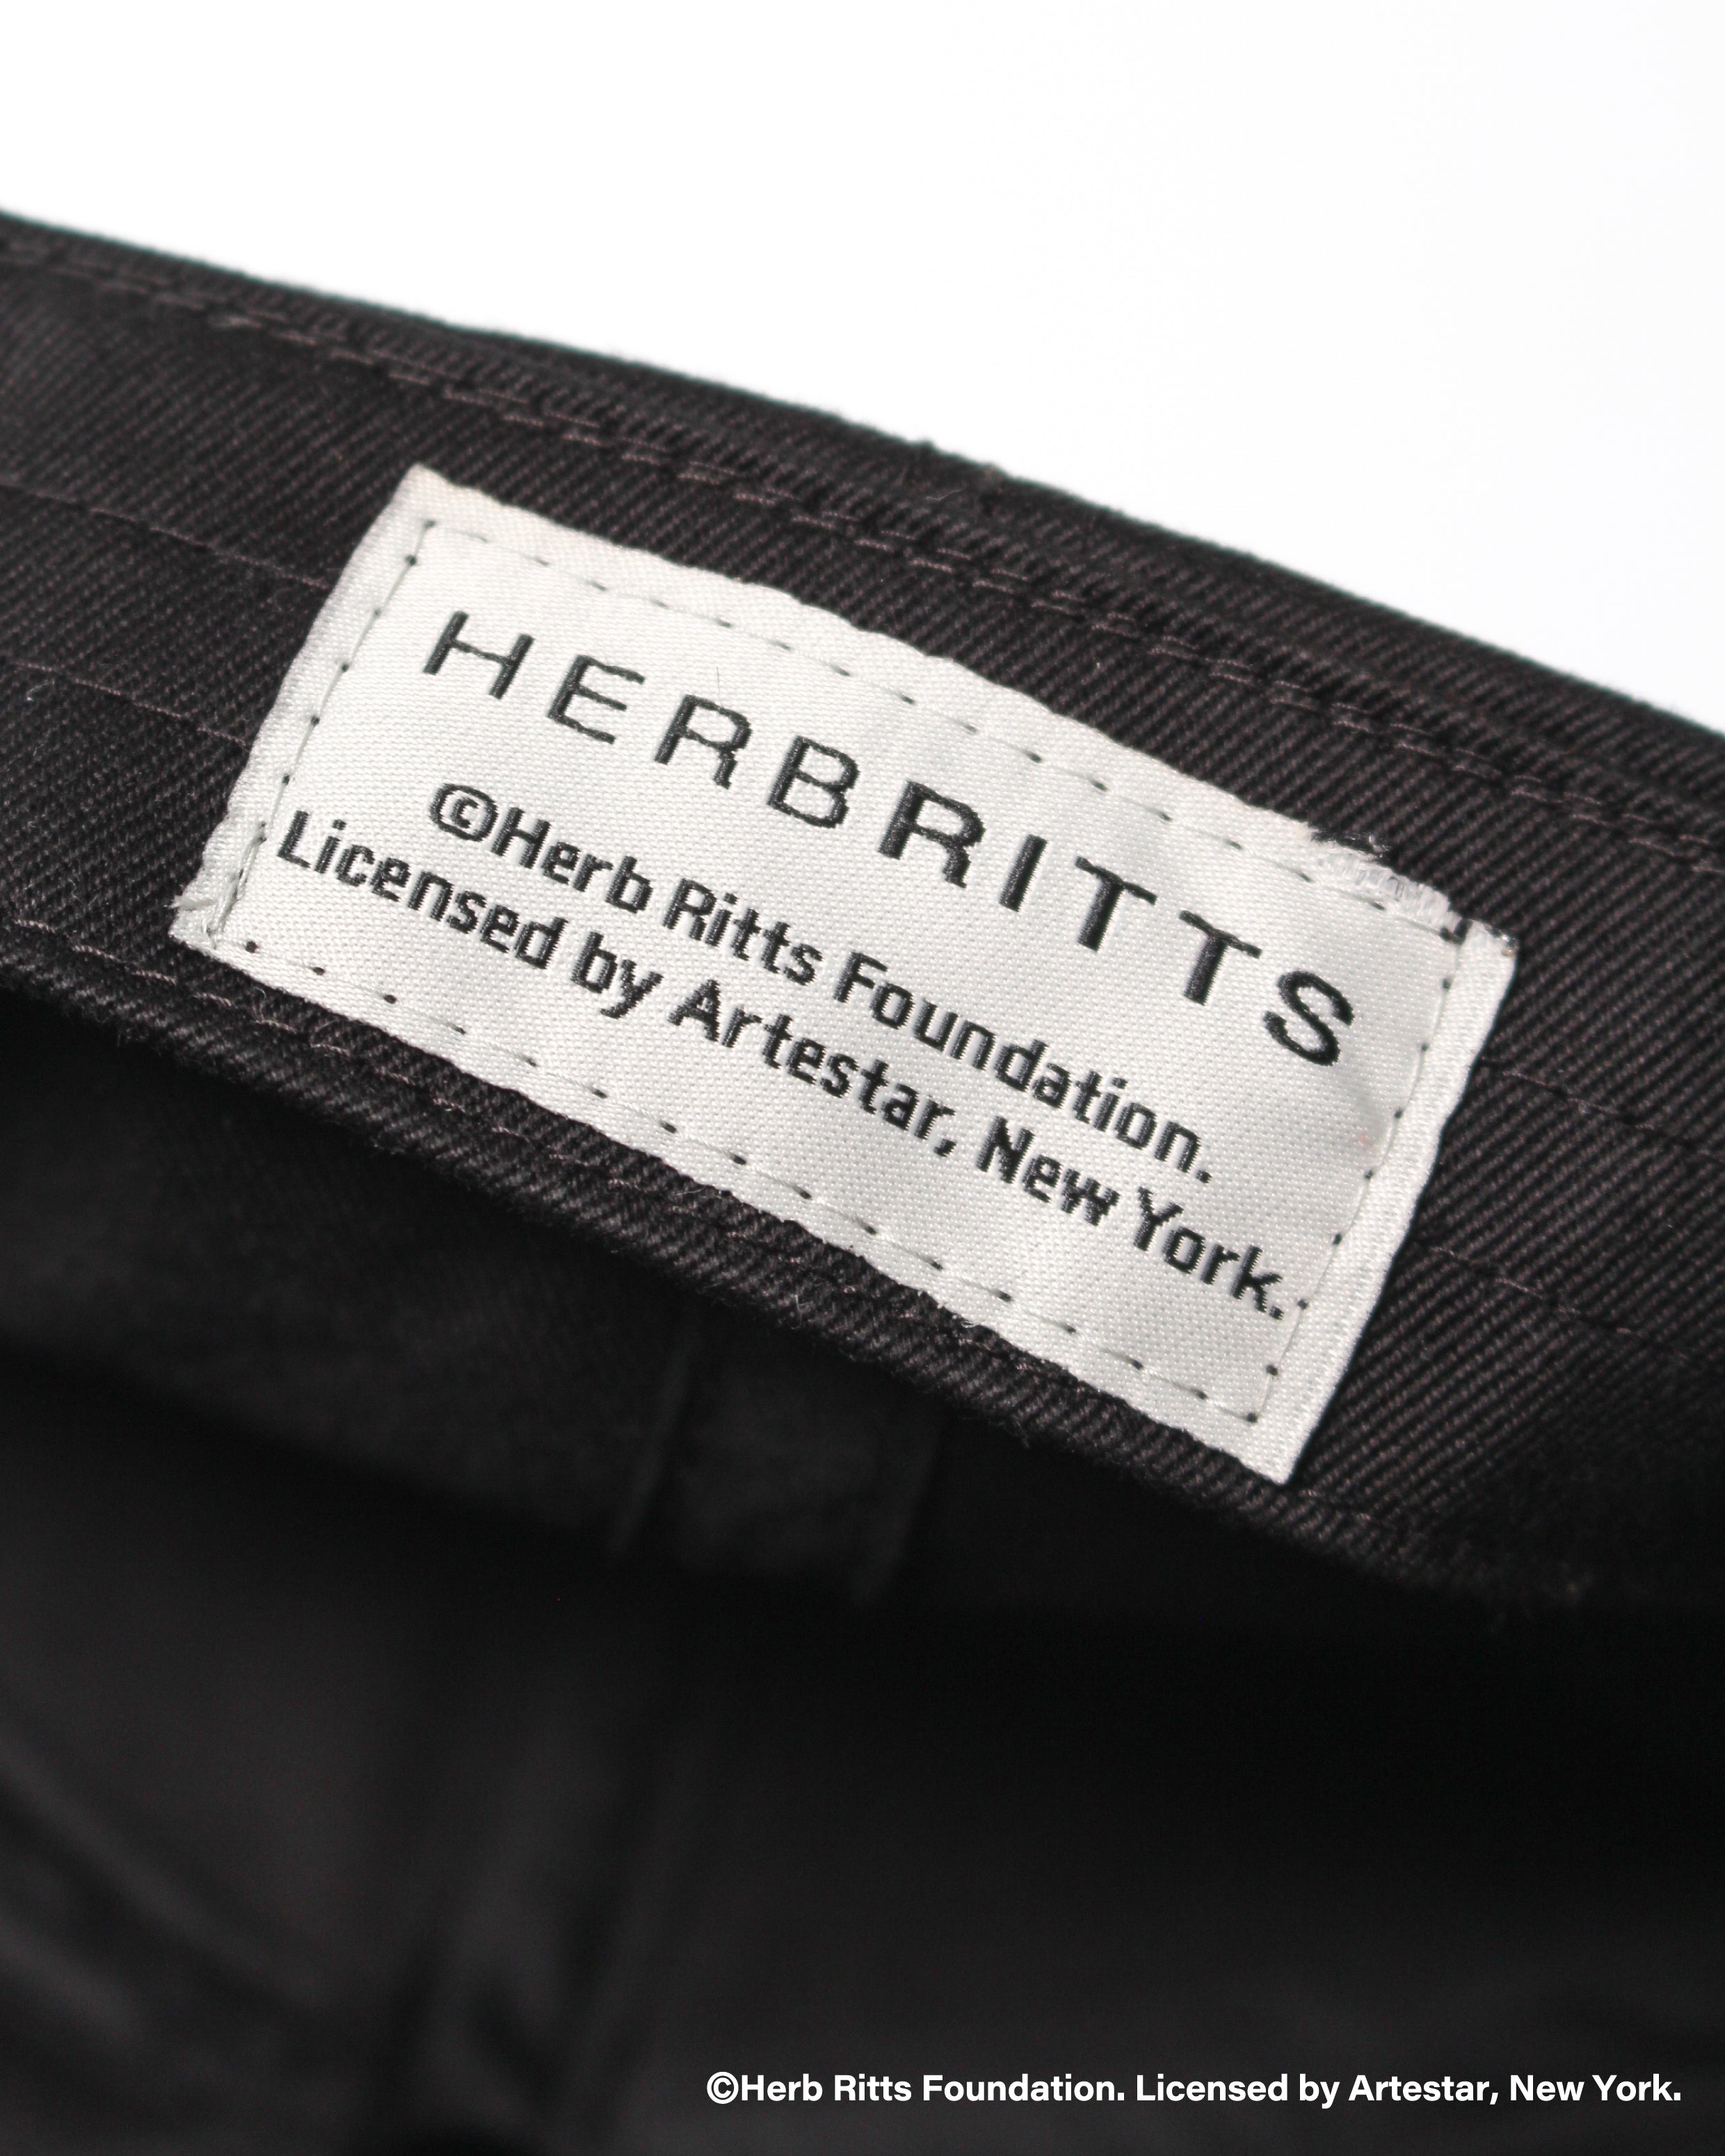 BOW WOW / HERB RITTS COLLECTION】HERB RITTS LOGO CAP – C30